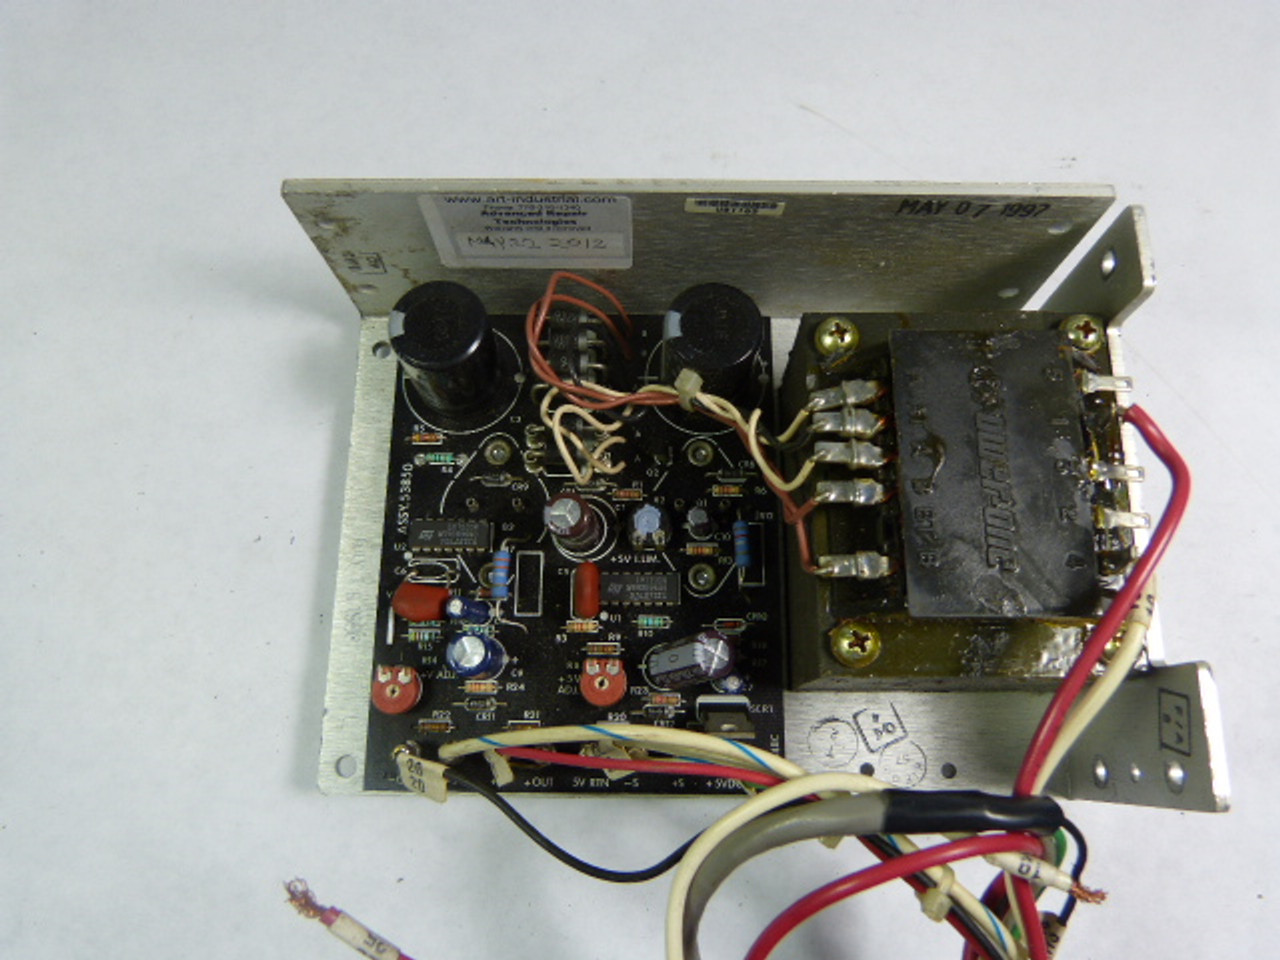 Power-One HBB512-A Power Supply USED